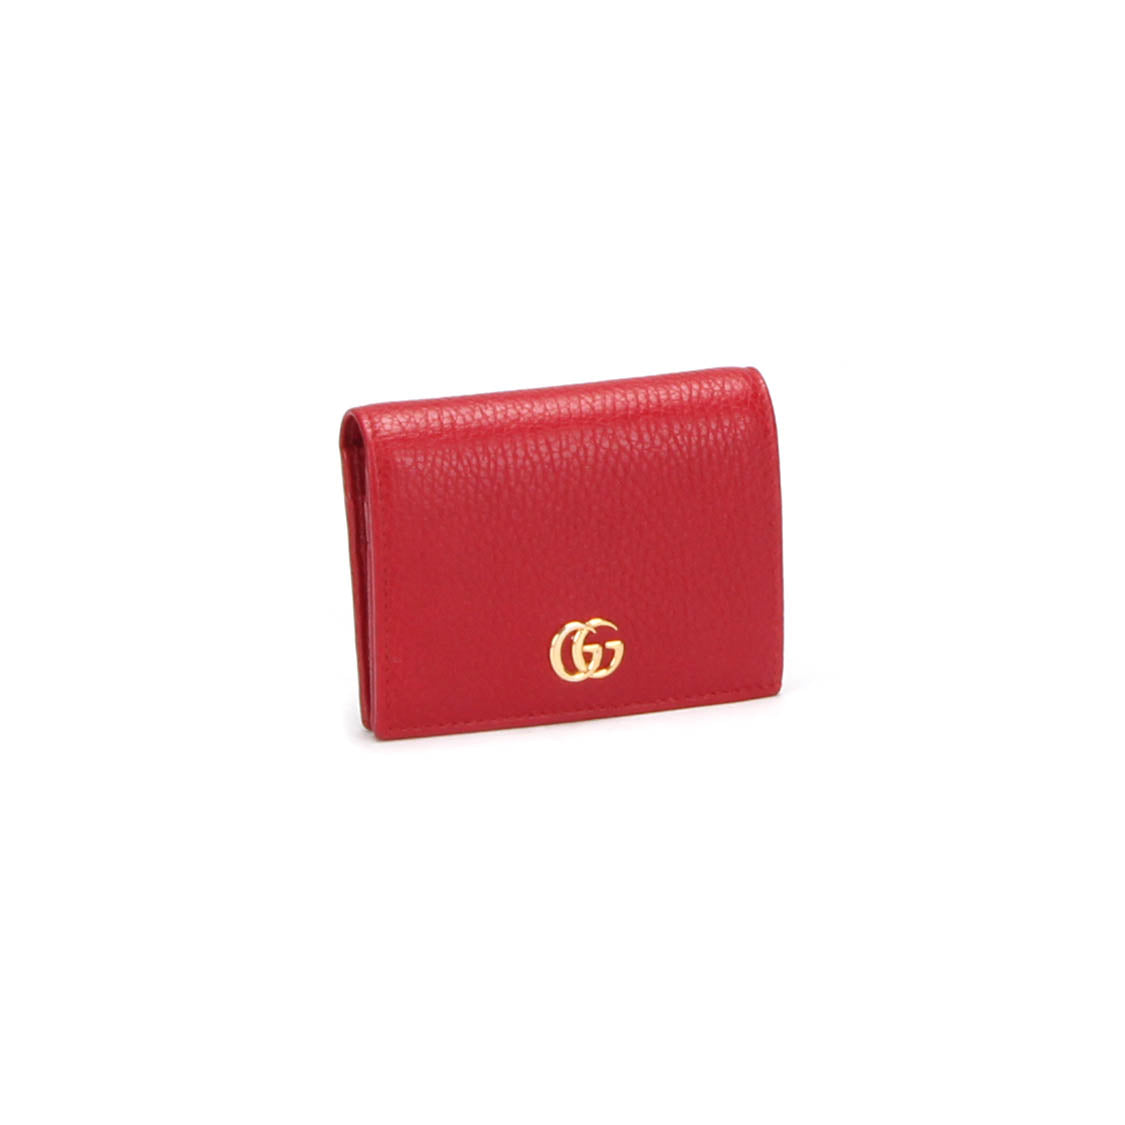 GG Leather Card Case 456126